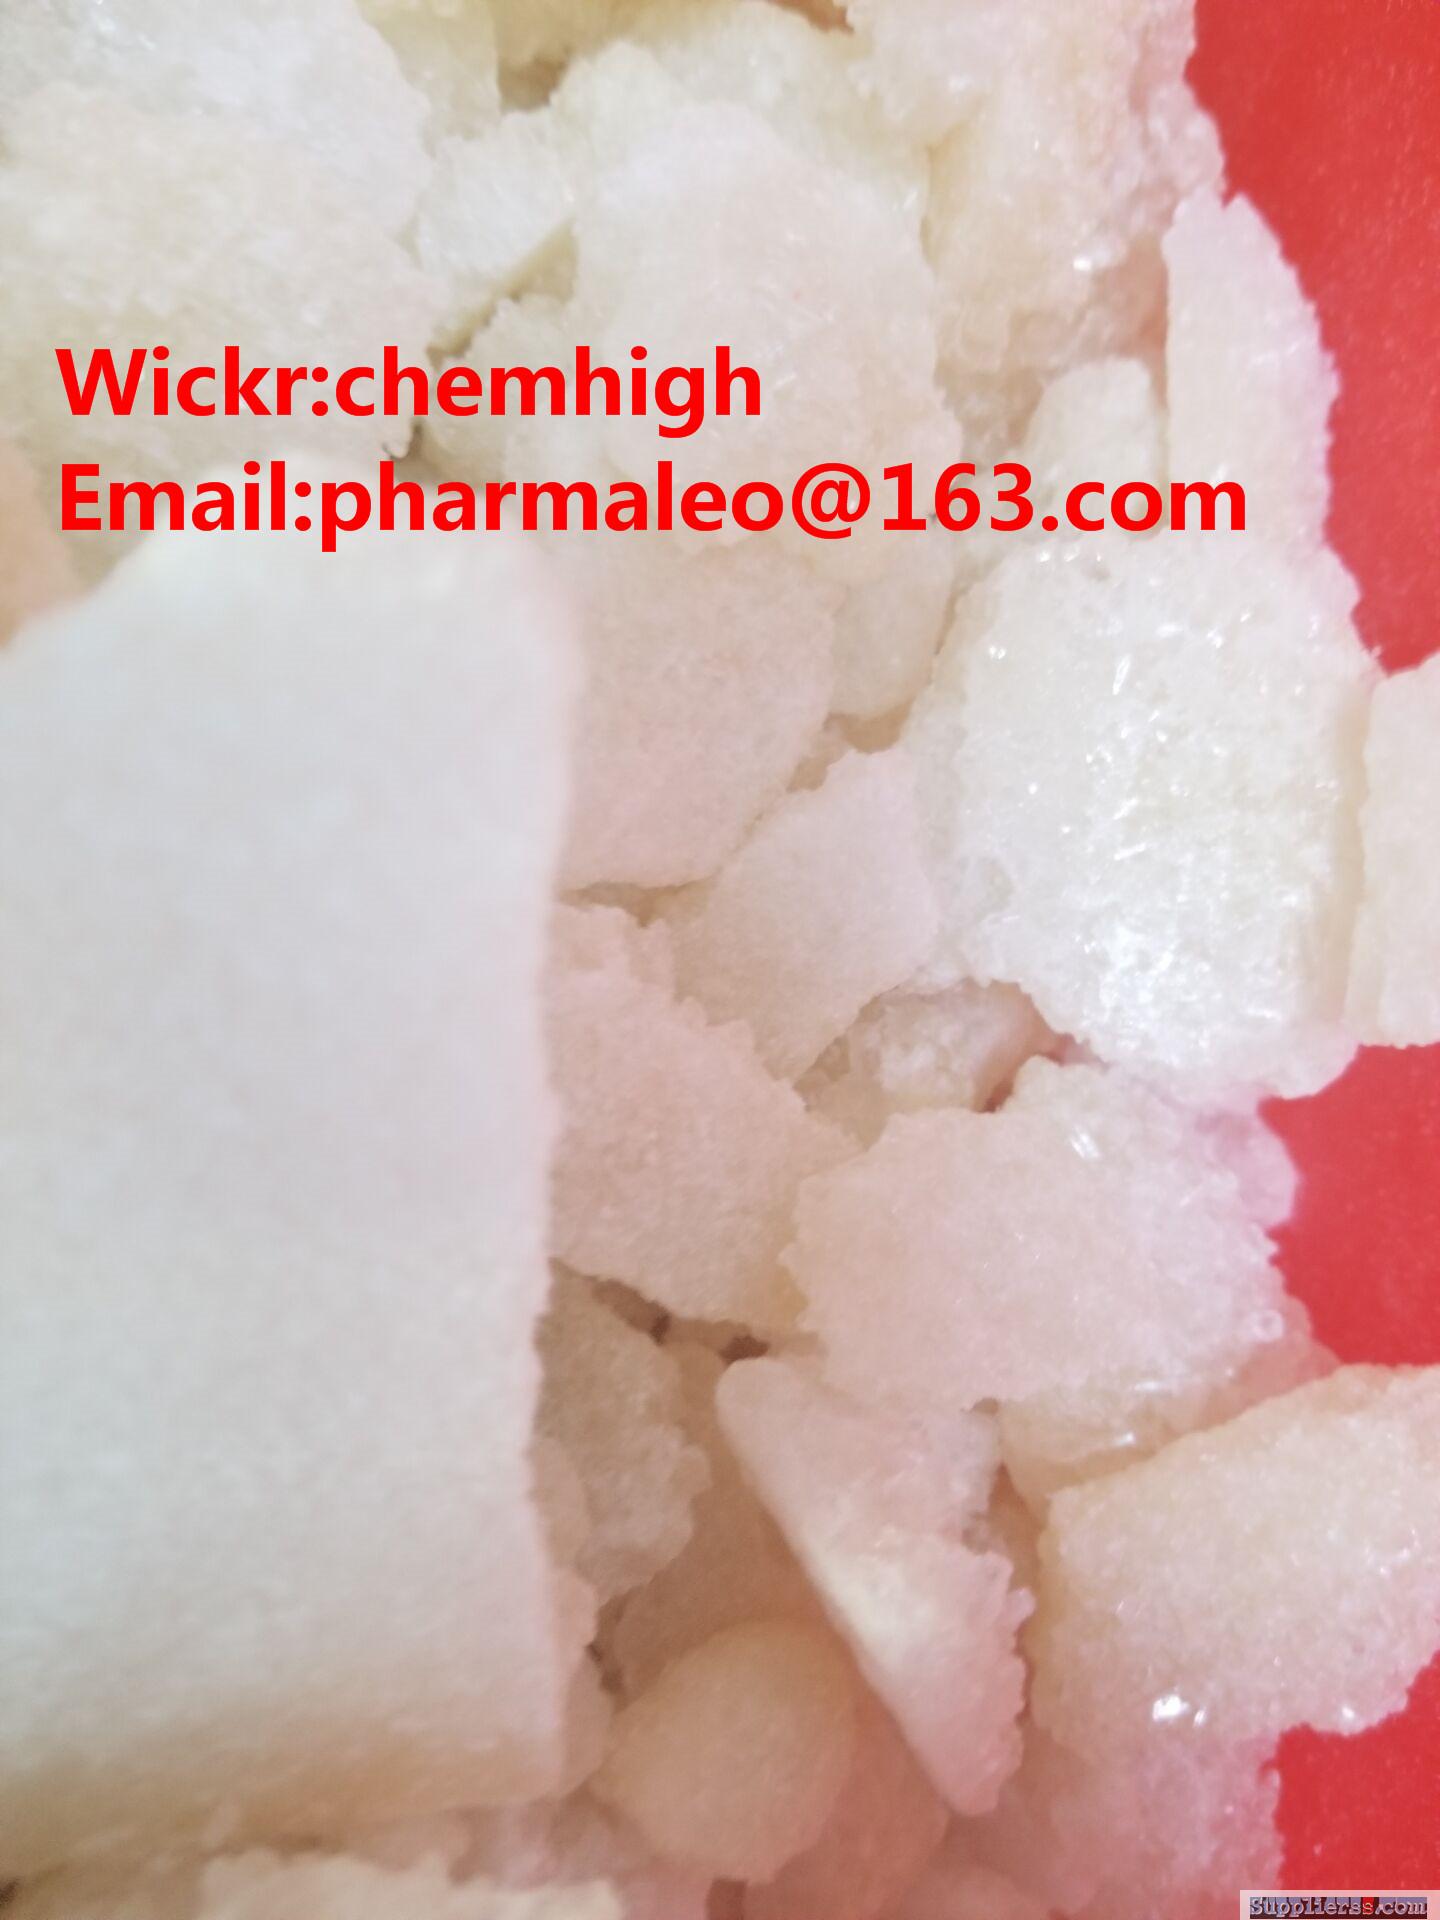 2FDCK,research chemical vendor.Wickr:chemhigh